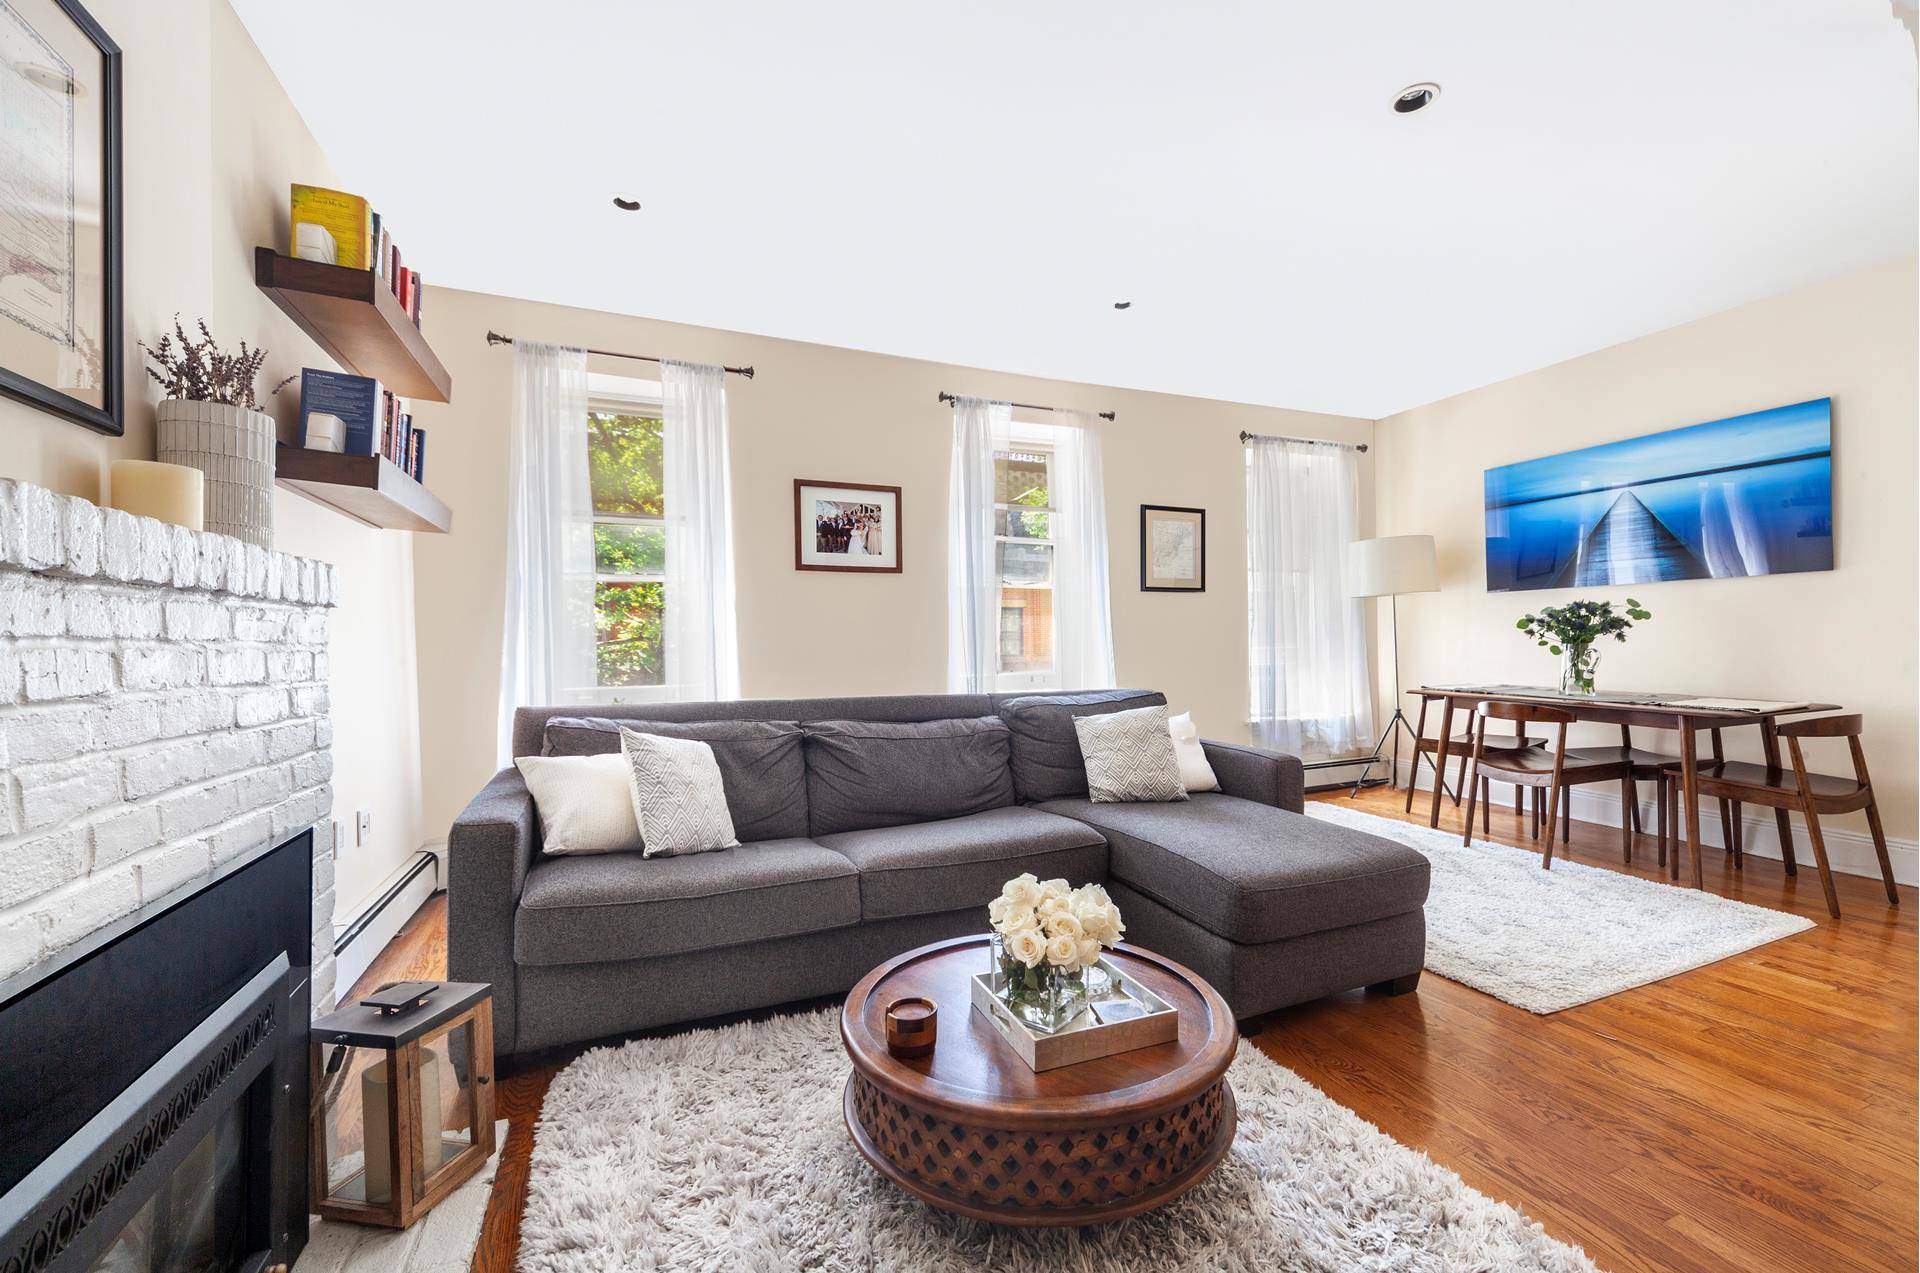 Set on beautiful tree lined Remsen Street, one of the most desirable, romantic streets in prime Brooklyn Heights and all of NYC for that matter, rests this impeccably renovated 2 ...